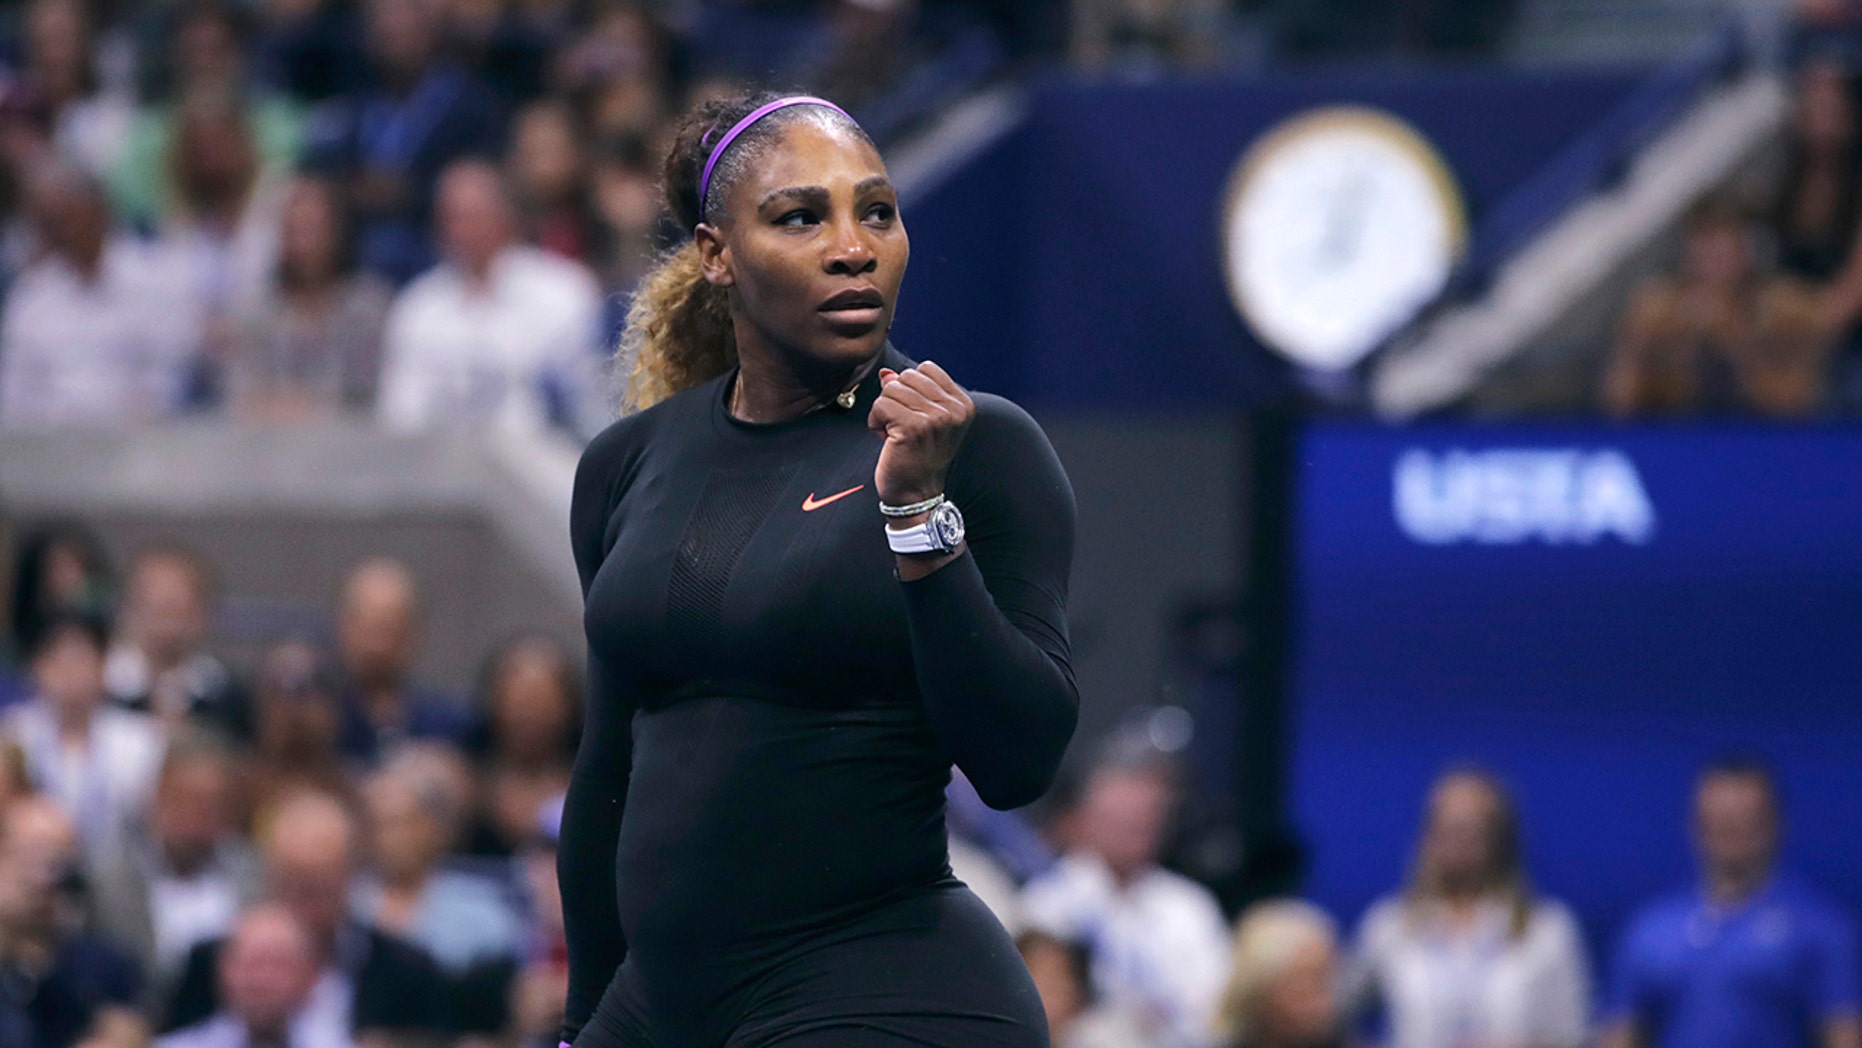 Serena Williams of the United States shakes her fist after defeating Qiang Wang of China in the quarterfinals of the Open American Tennis Tournament on Tuesday, September 3, 2019 in New York. Williams won 6-1, 6-0. (AP Photo / Charles Krupa)